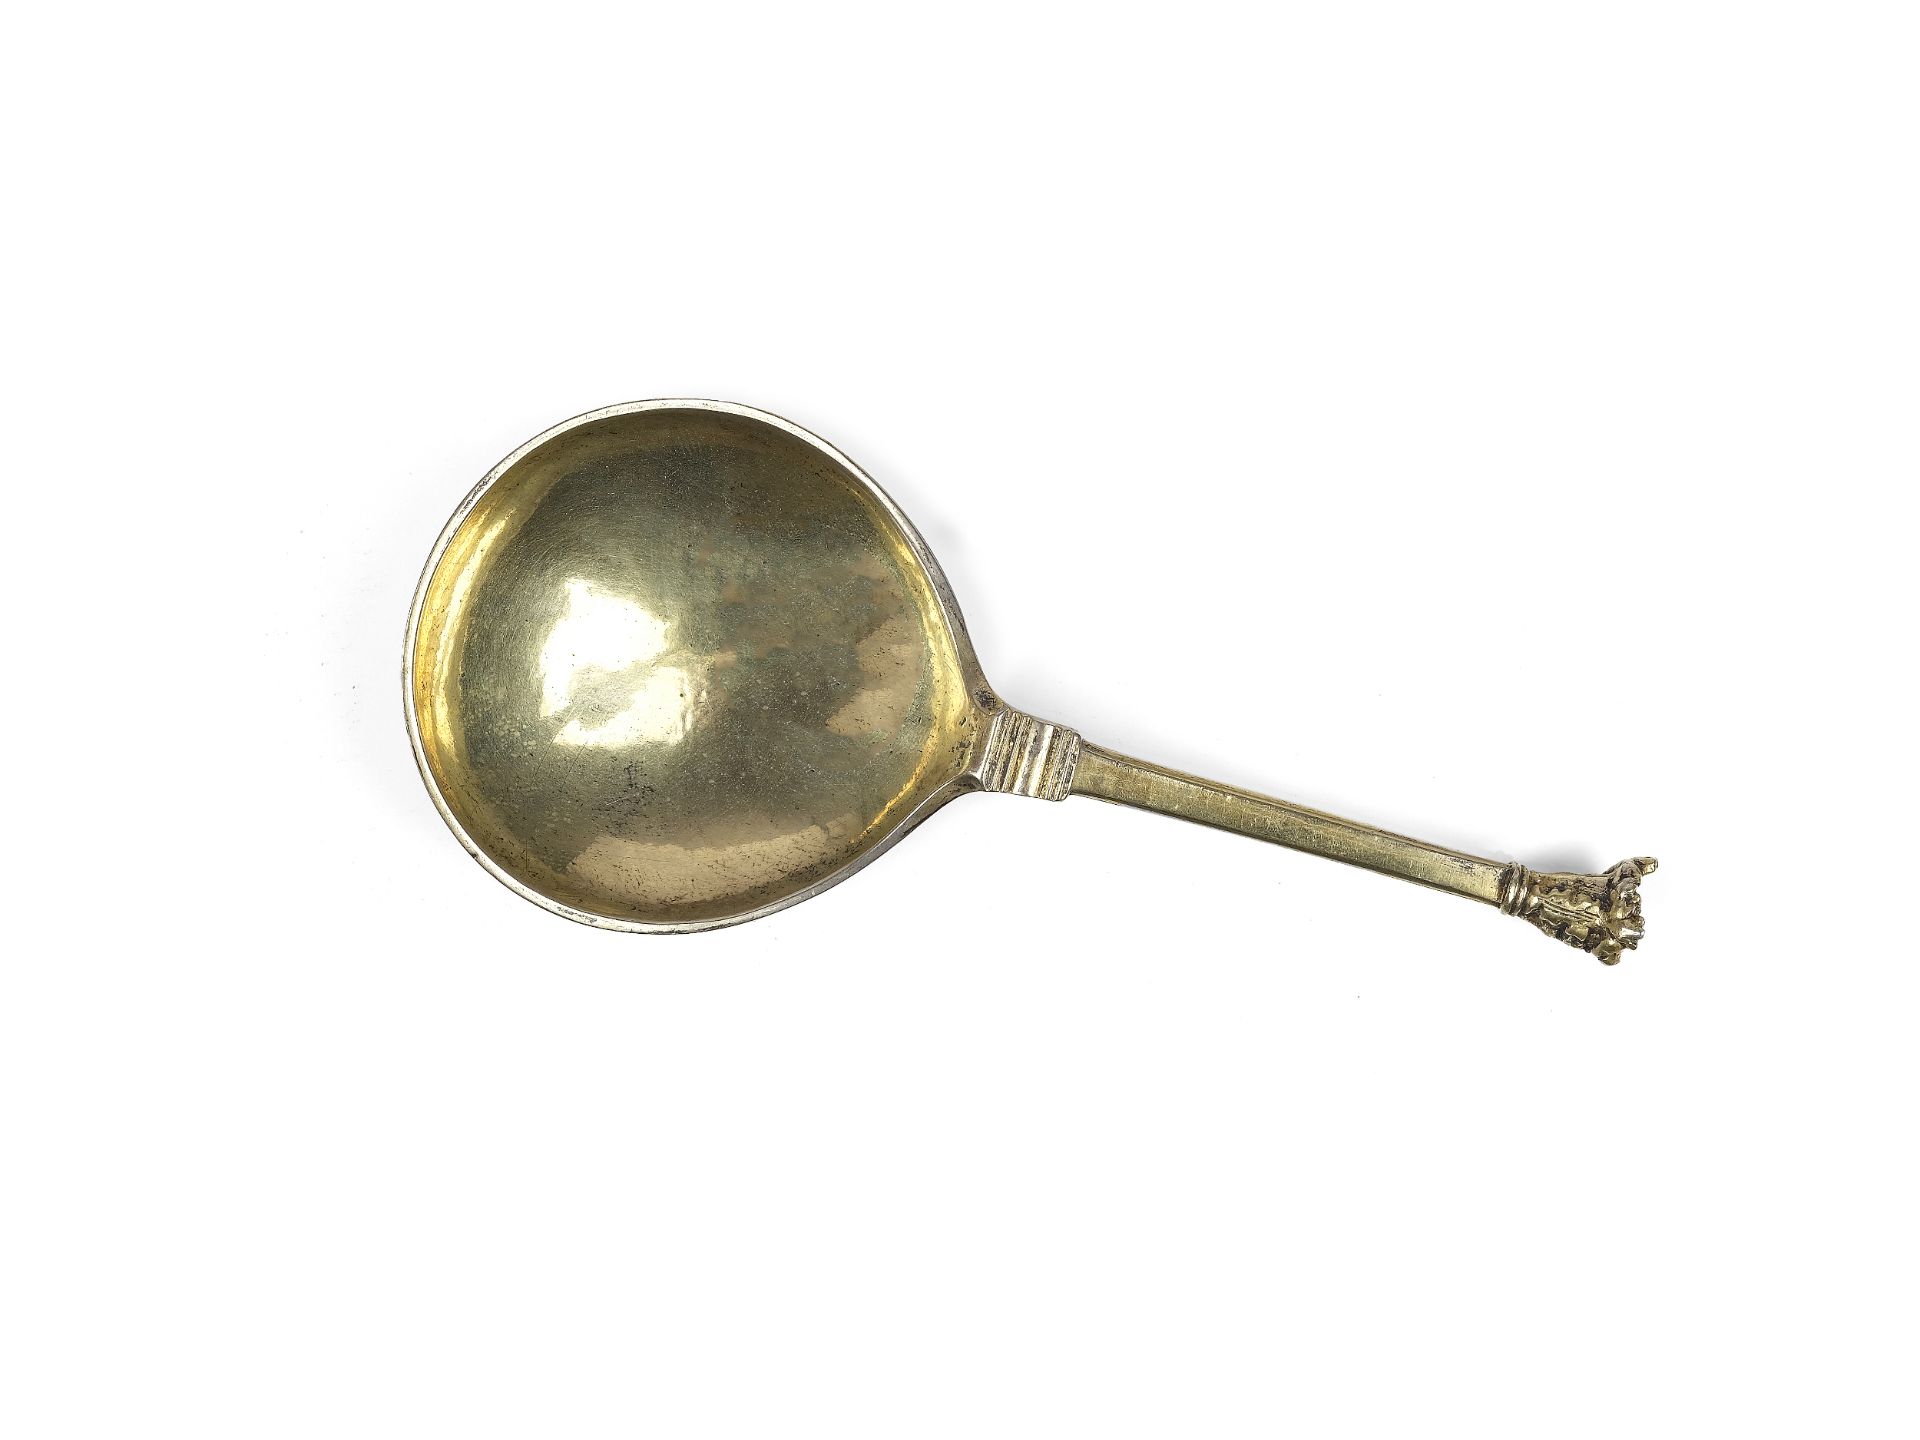 Gothic spoon, late 15th/early 16th century